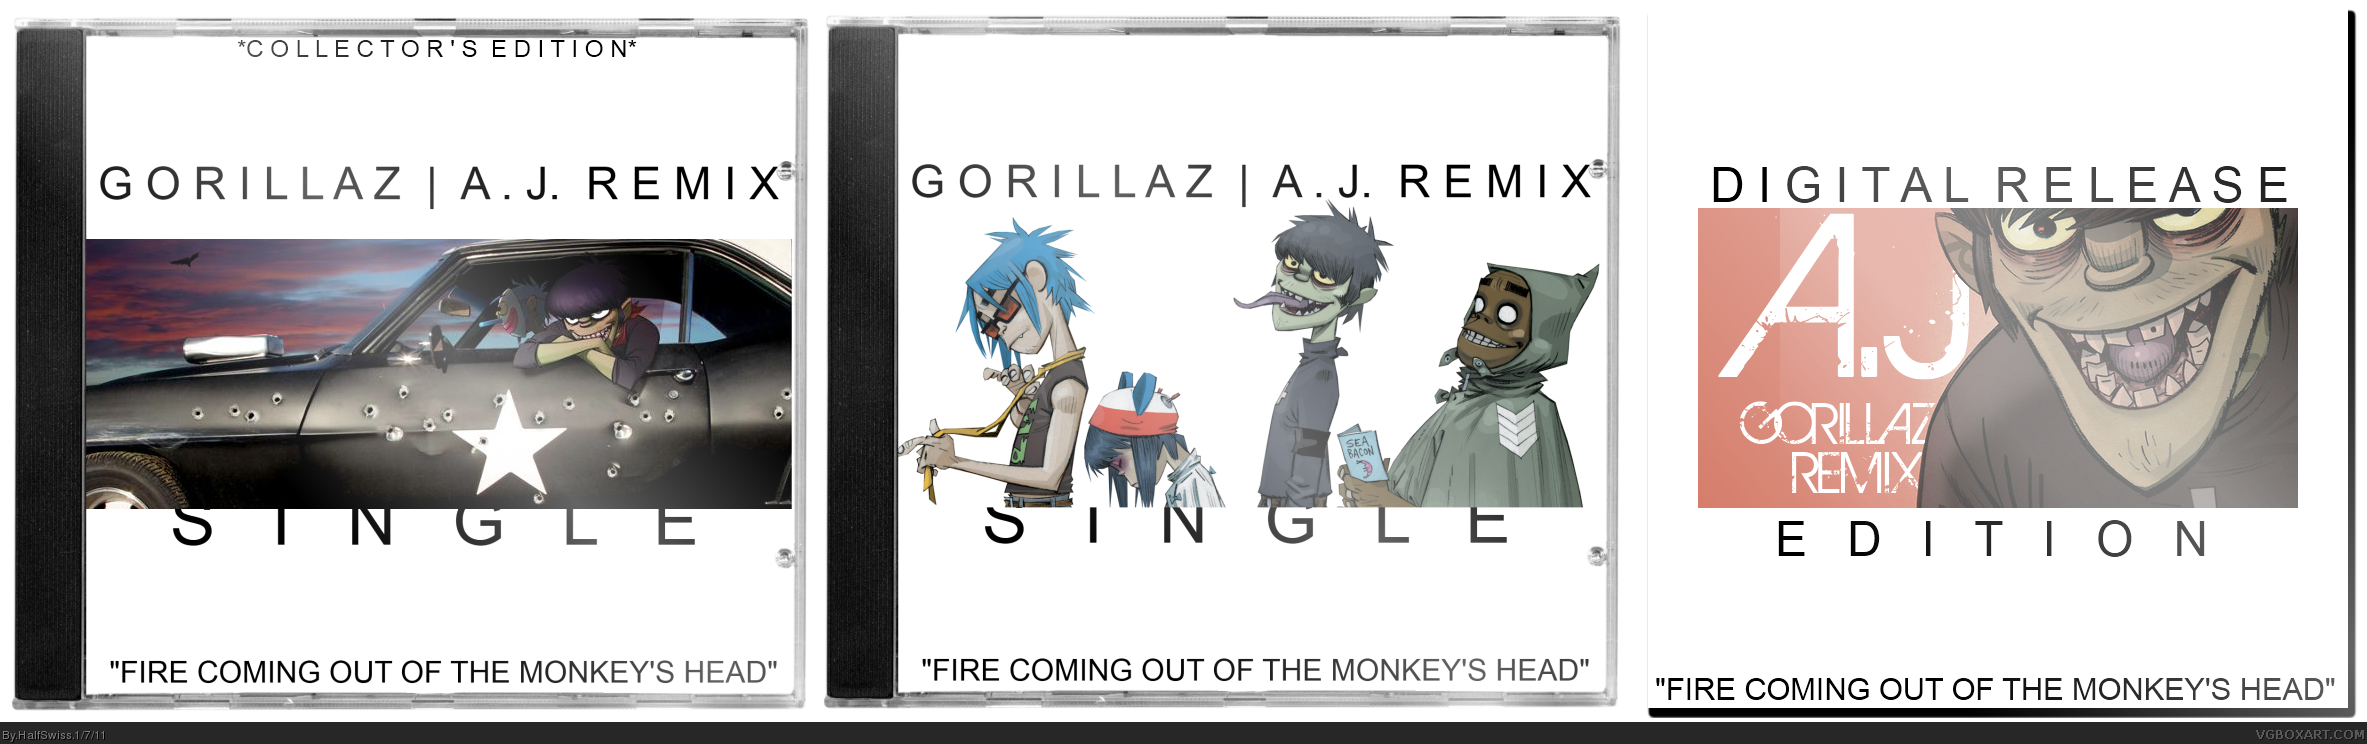 Gorillaz: Fire Coming Out... (A.J. Remix) - Single box cover